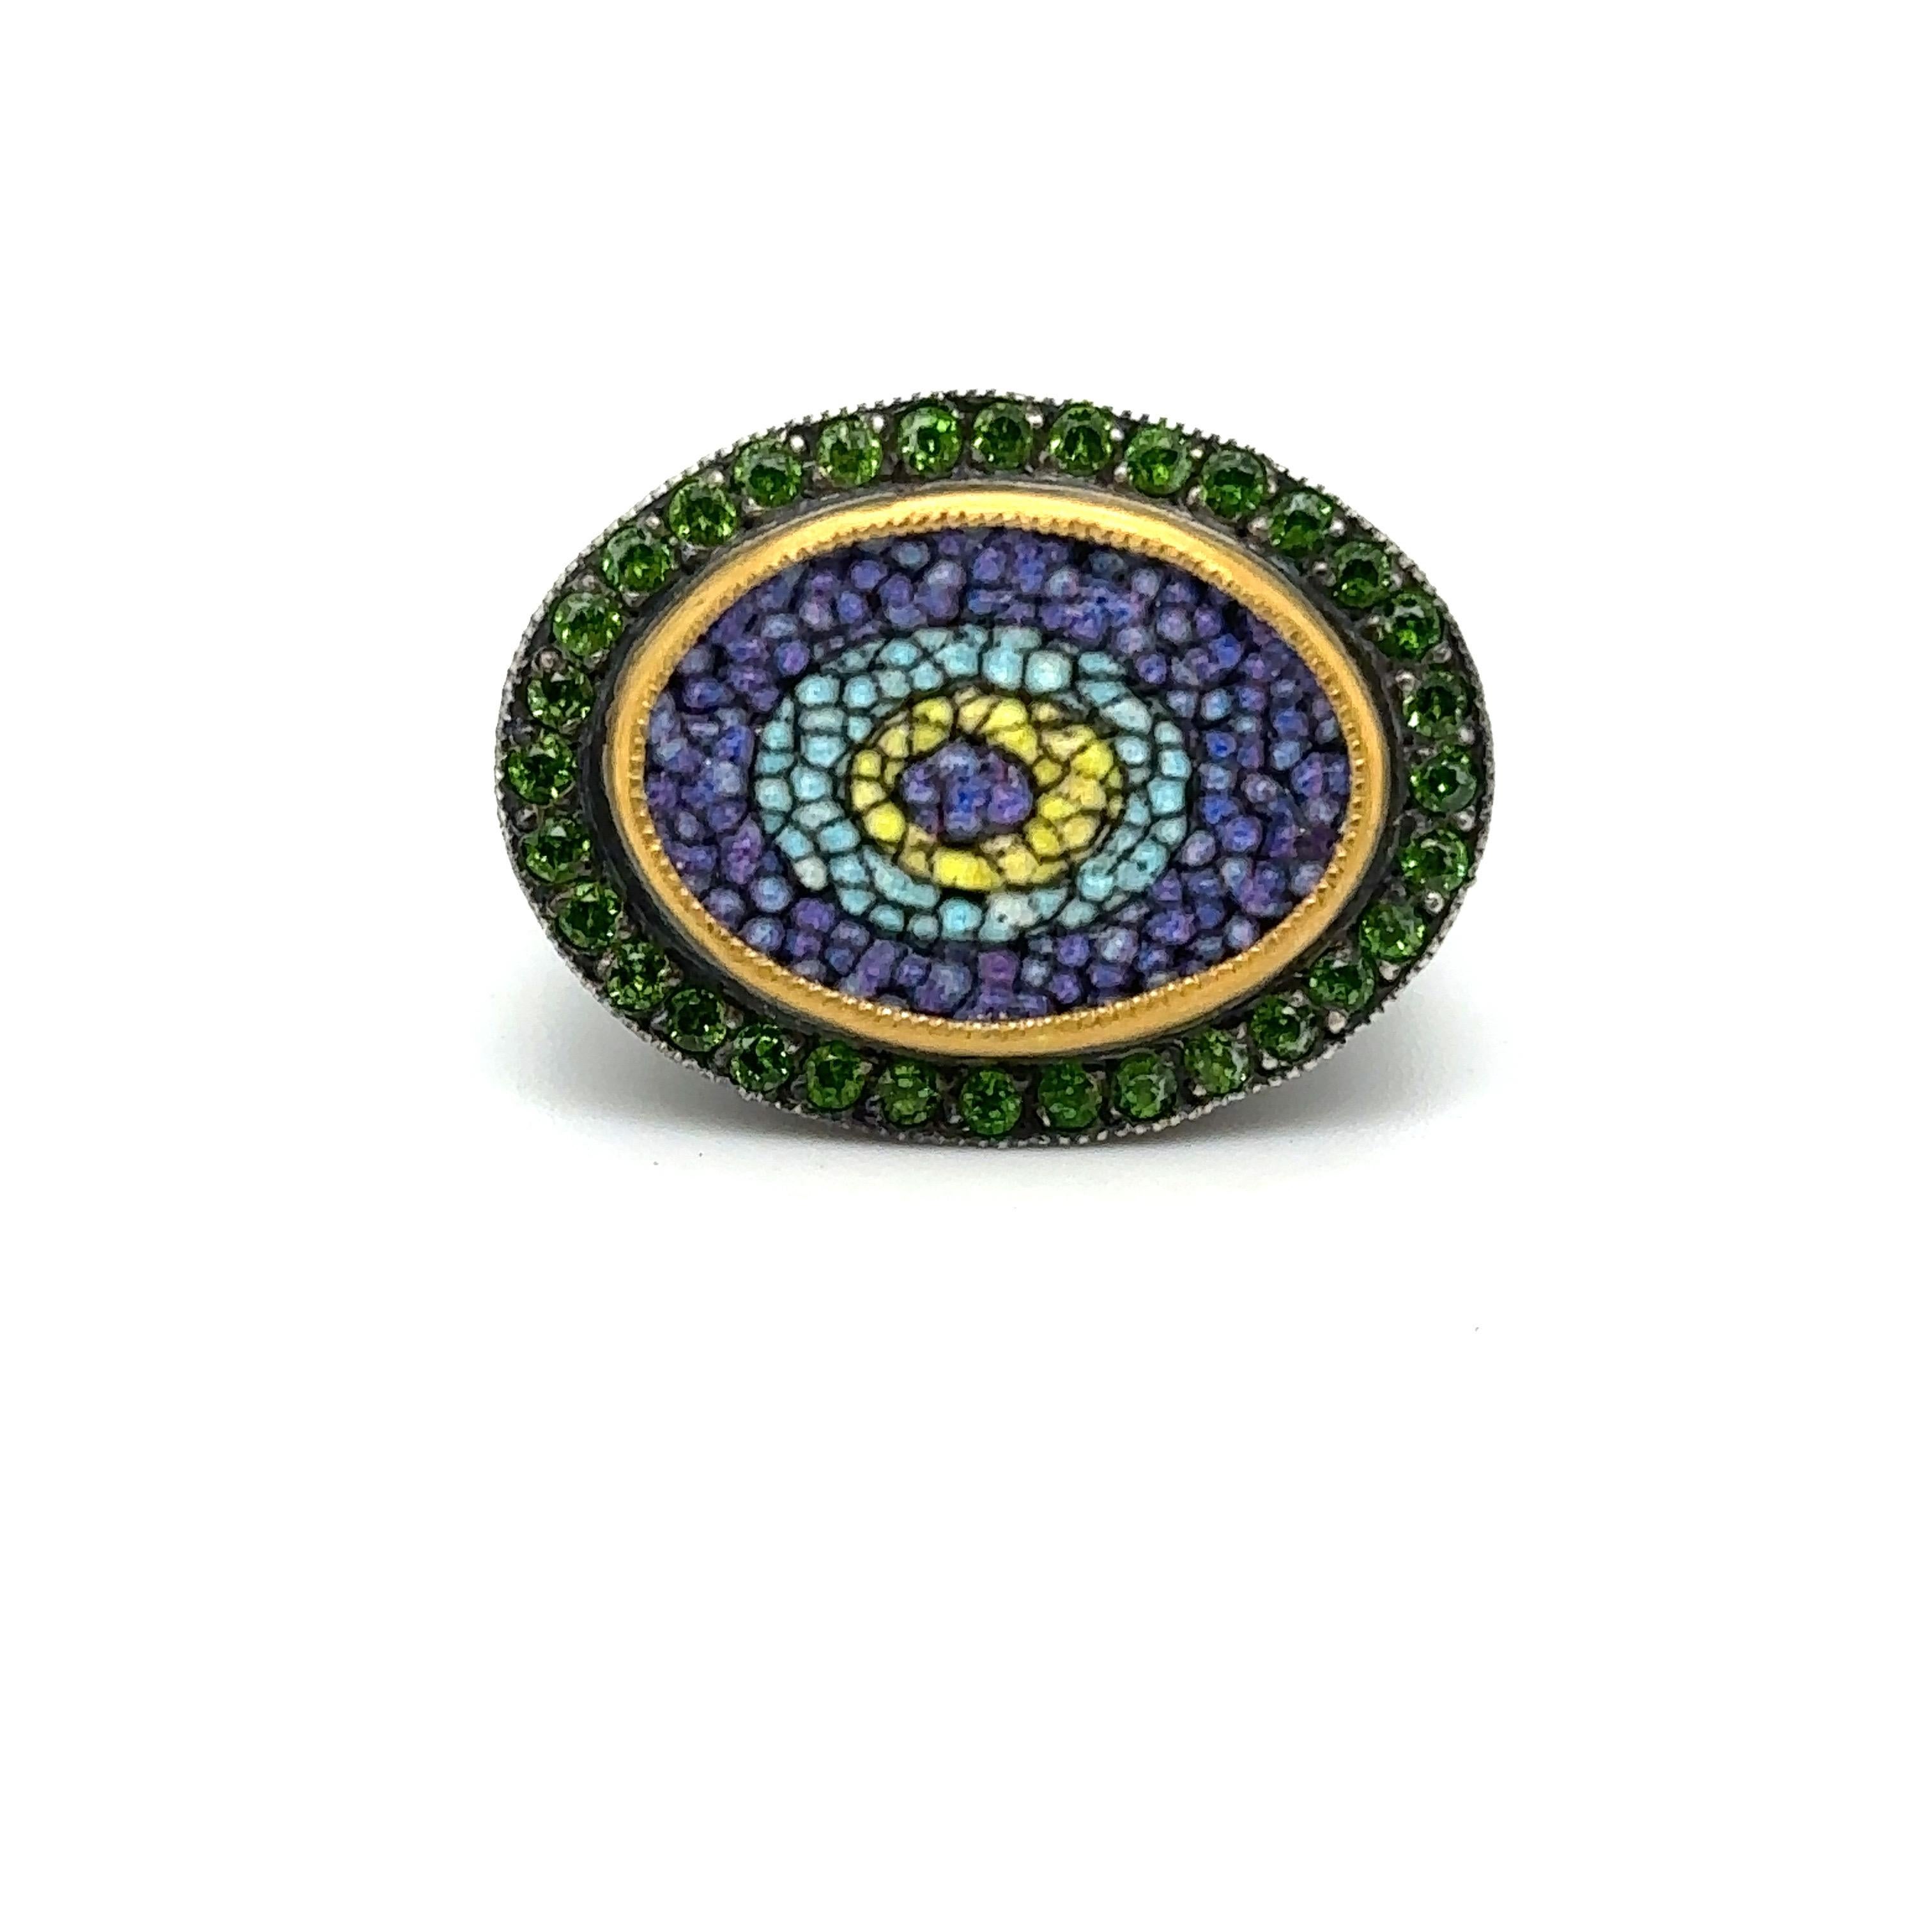 JAS-19-1965 - 24KT GOLD/SS EVIL EYE MOSAIC RING with 0.60CT CHROME DIOPSIDES In New Condition For Sale In New York, NY